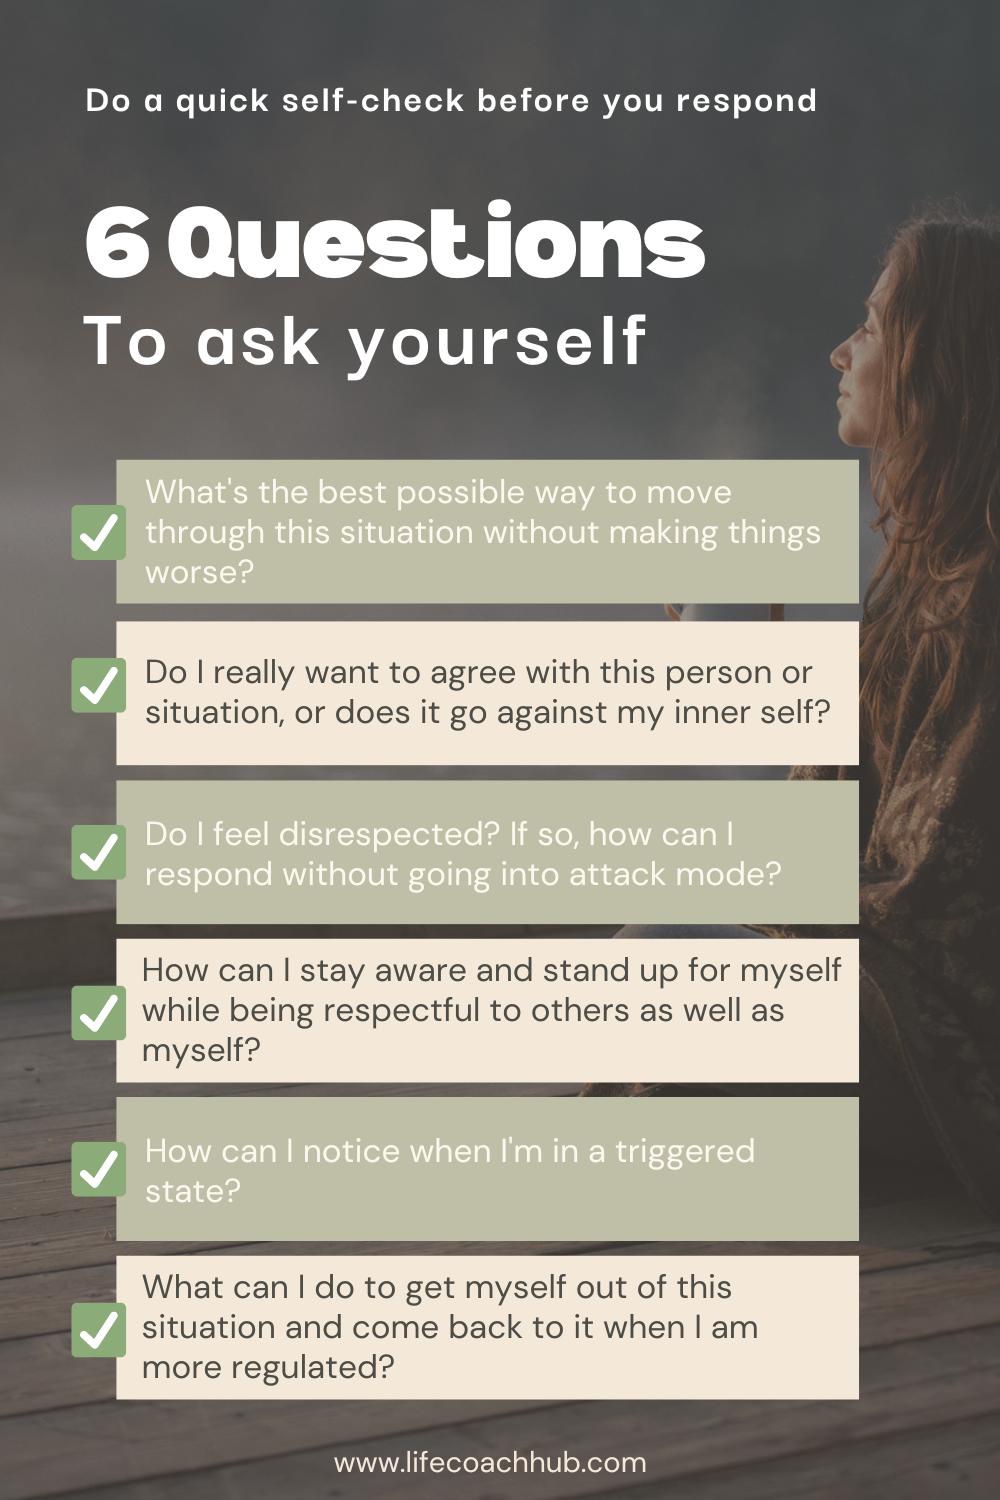 6 Questions To ask yourself